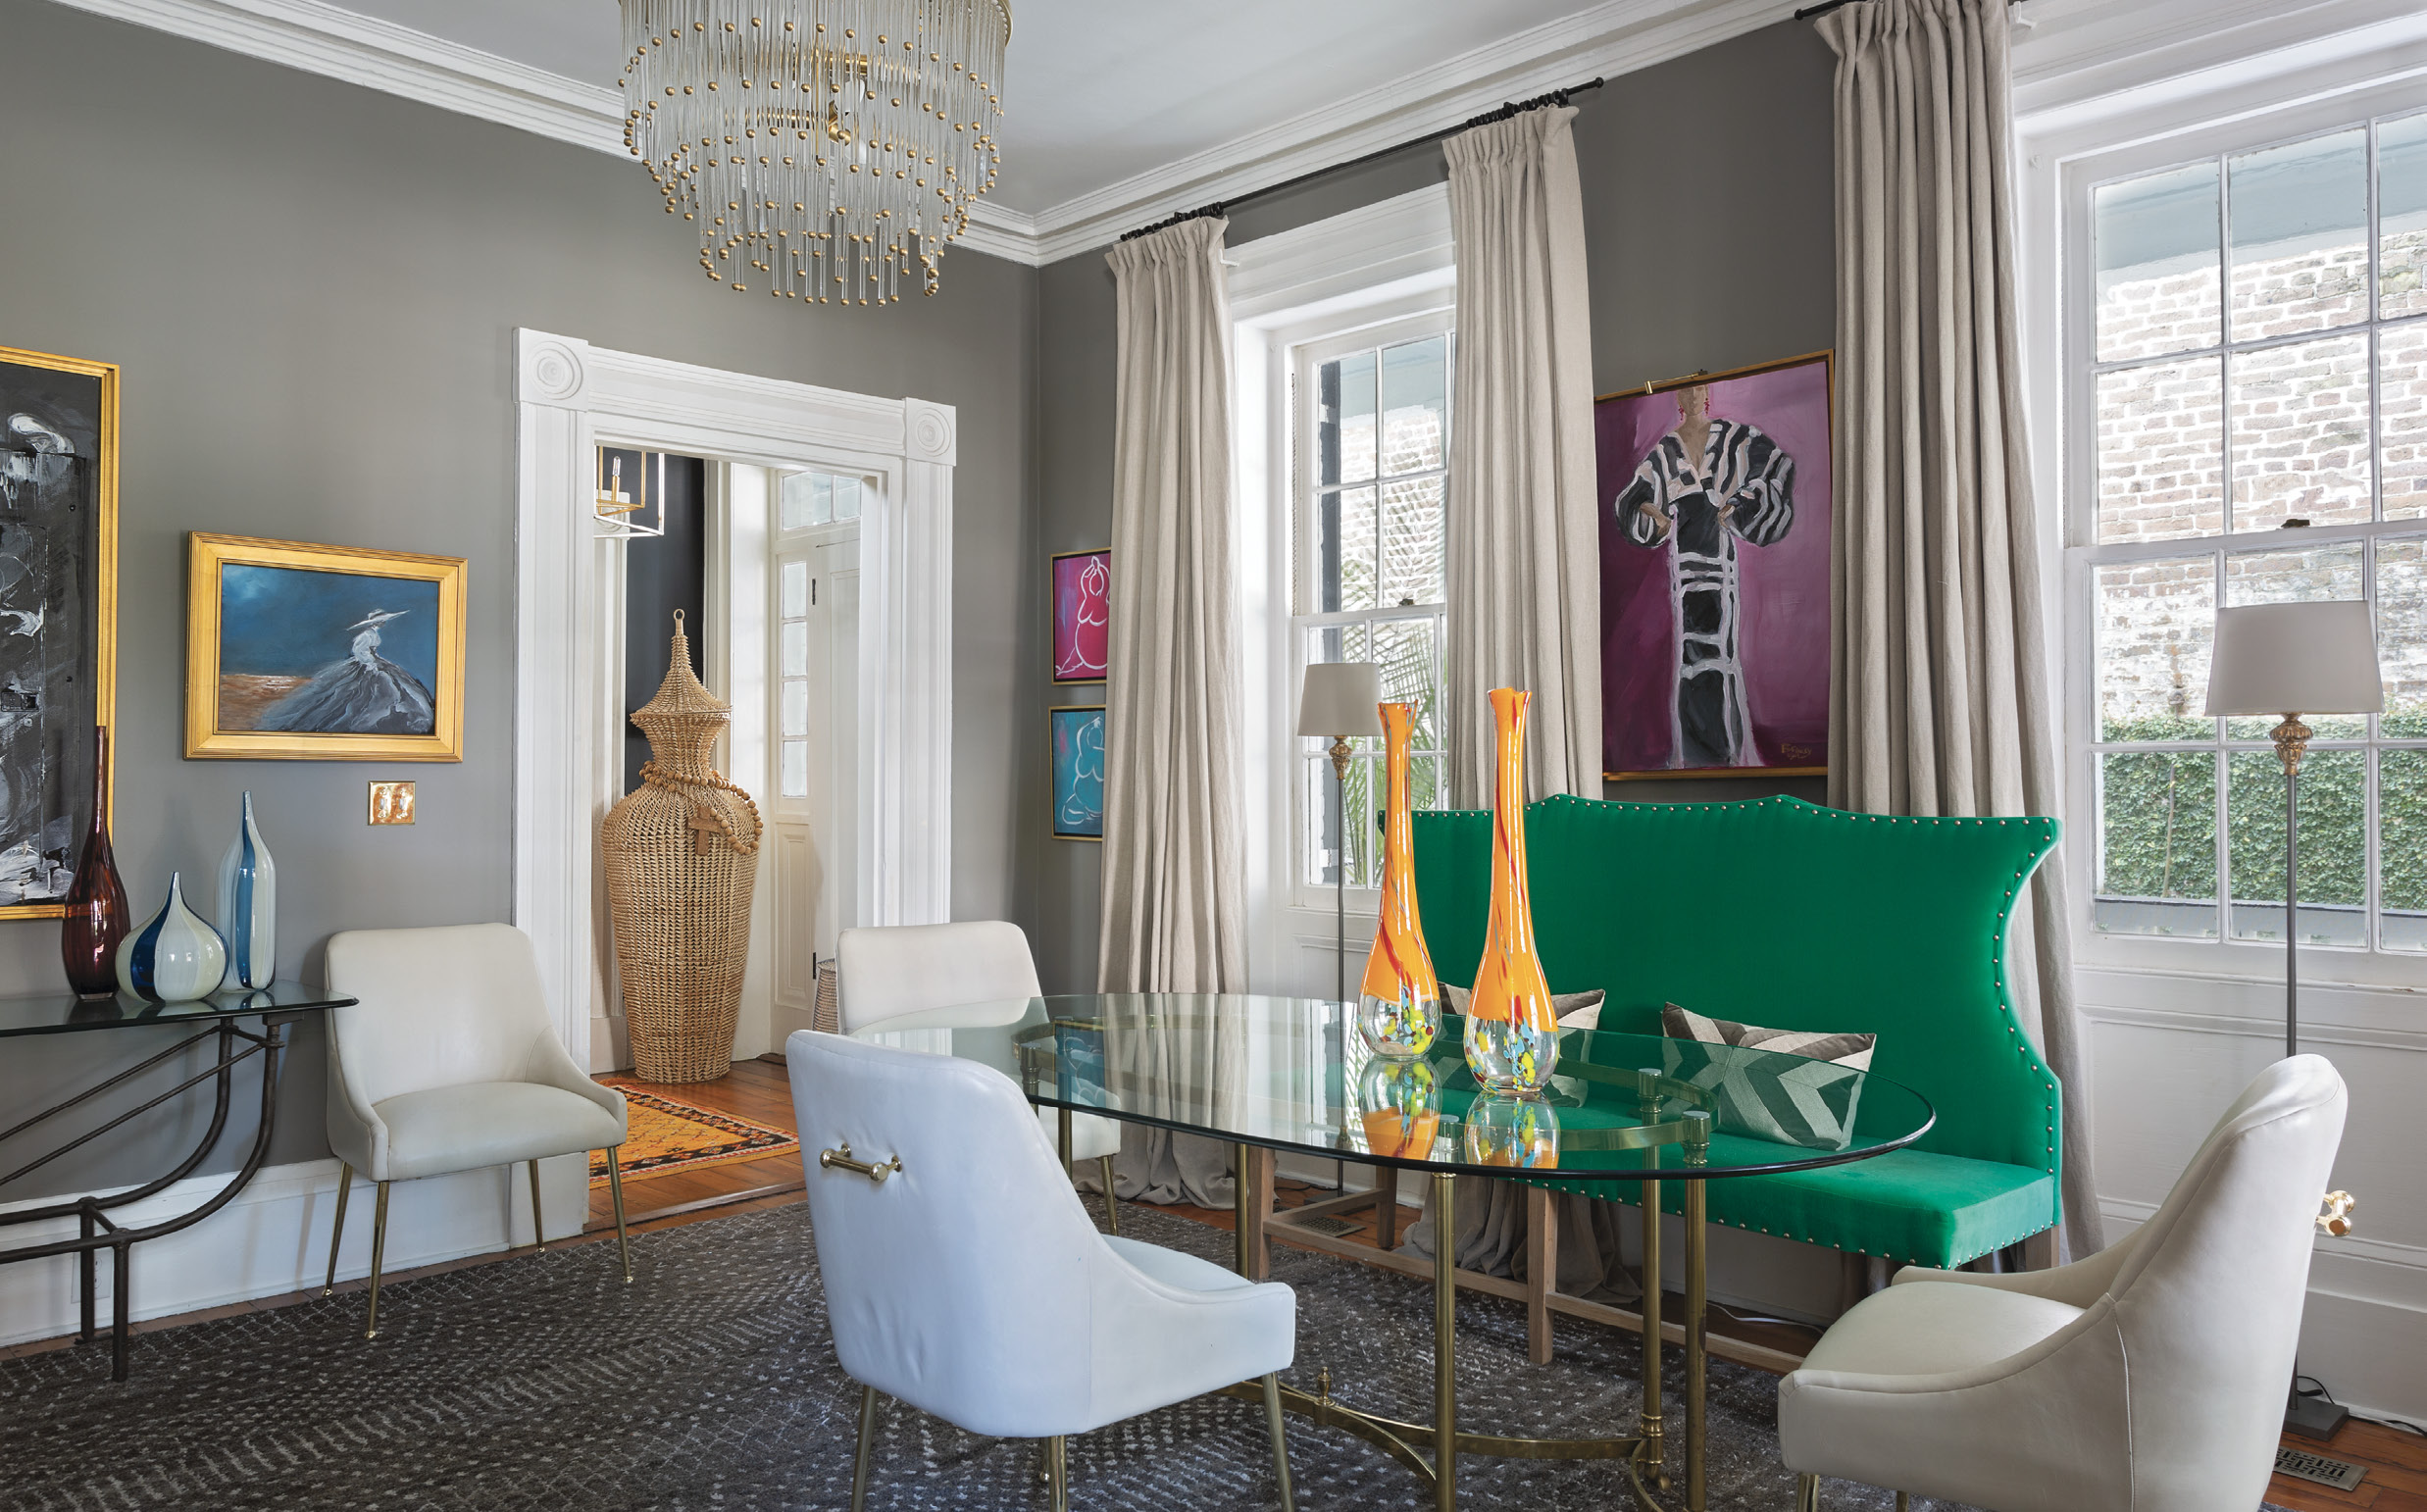 Something Old, Something New: Bold colors, eclectic art, contrasting fabrics, and a smattering of antiques turn a formal sitting room into a dynamic space. The glass dining table from Patricia Allen Antiques at Fritz Porter dispenses with formality, thanks to white leather chairs from Anthropologie and a green velvet settee from South of Market downtown.